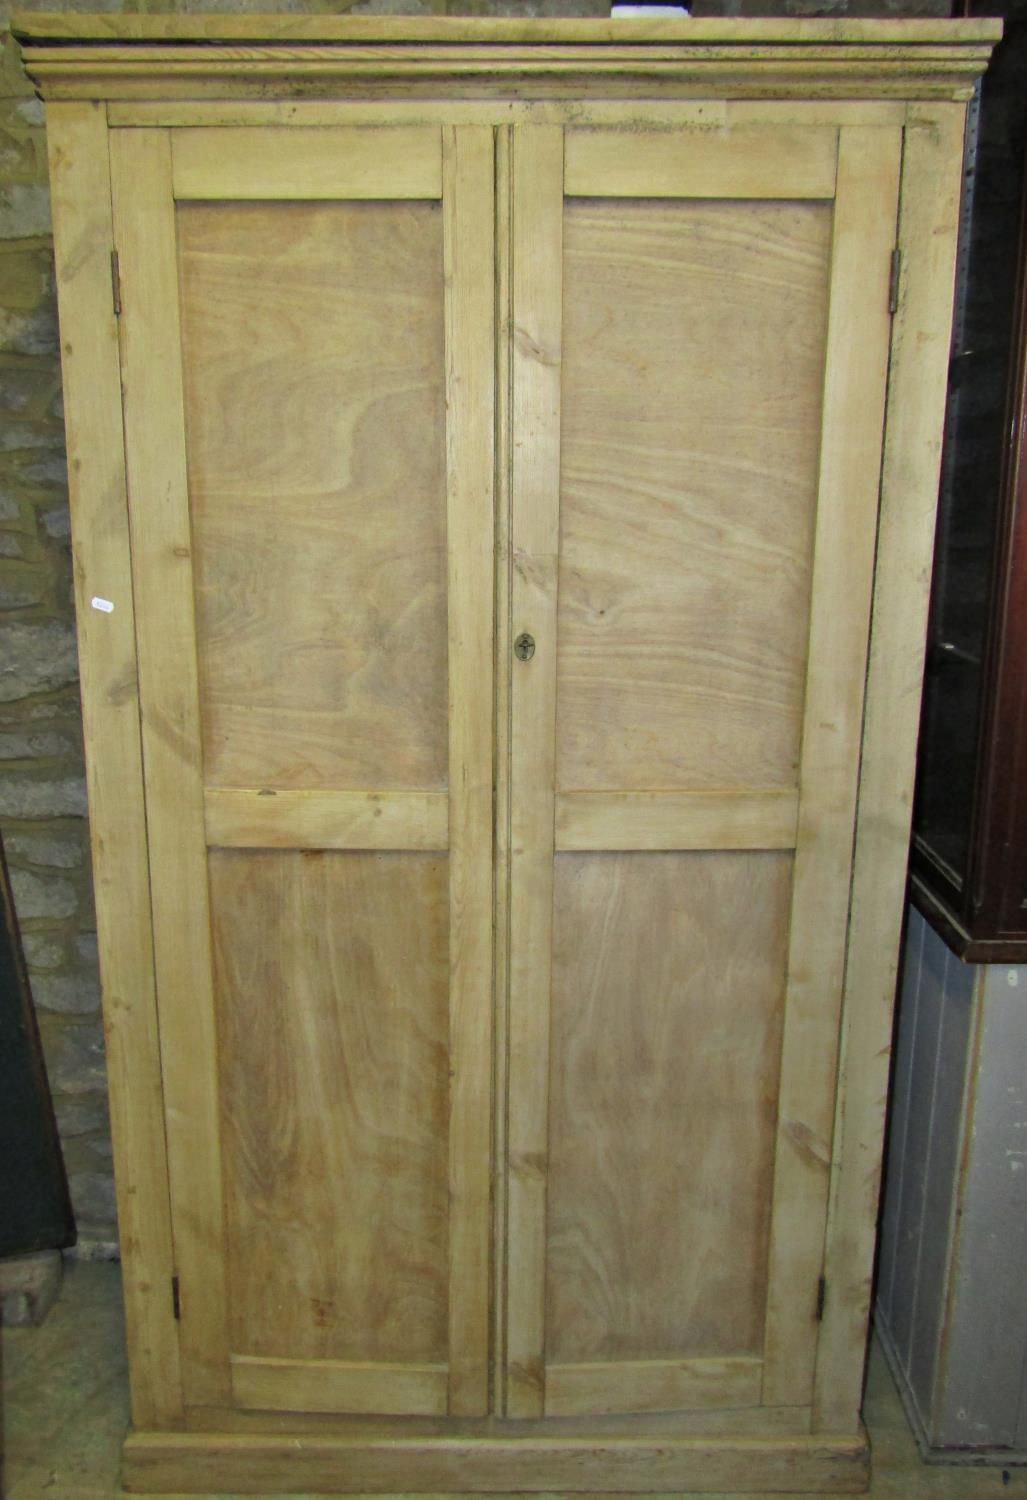 An antique stripped pine floorstanding side cupboard enclosed by a pair of full length plywood